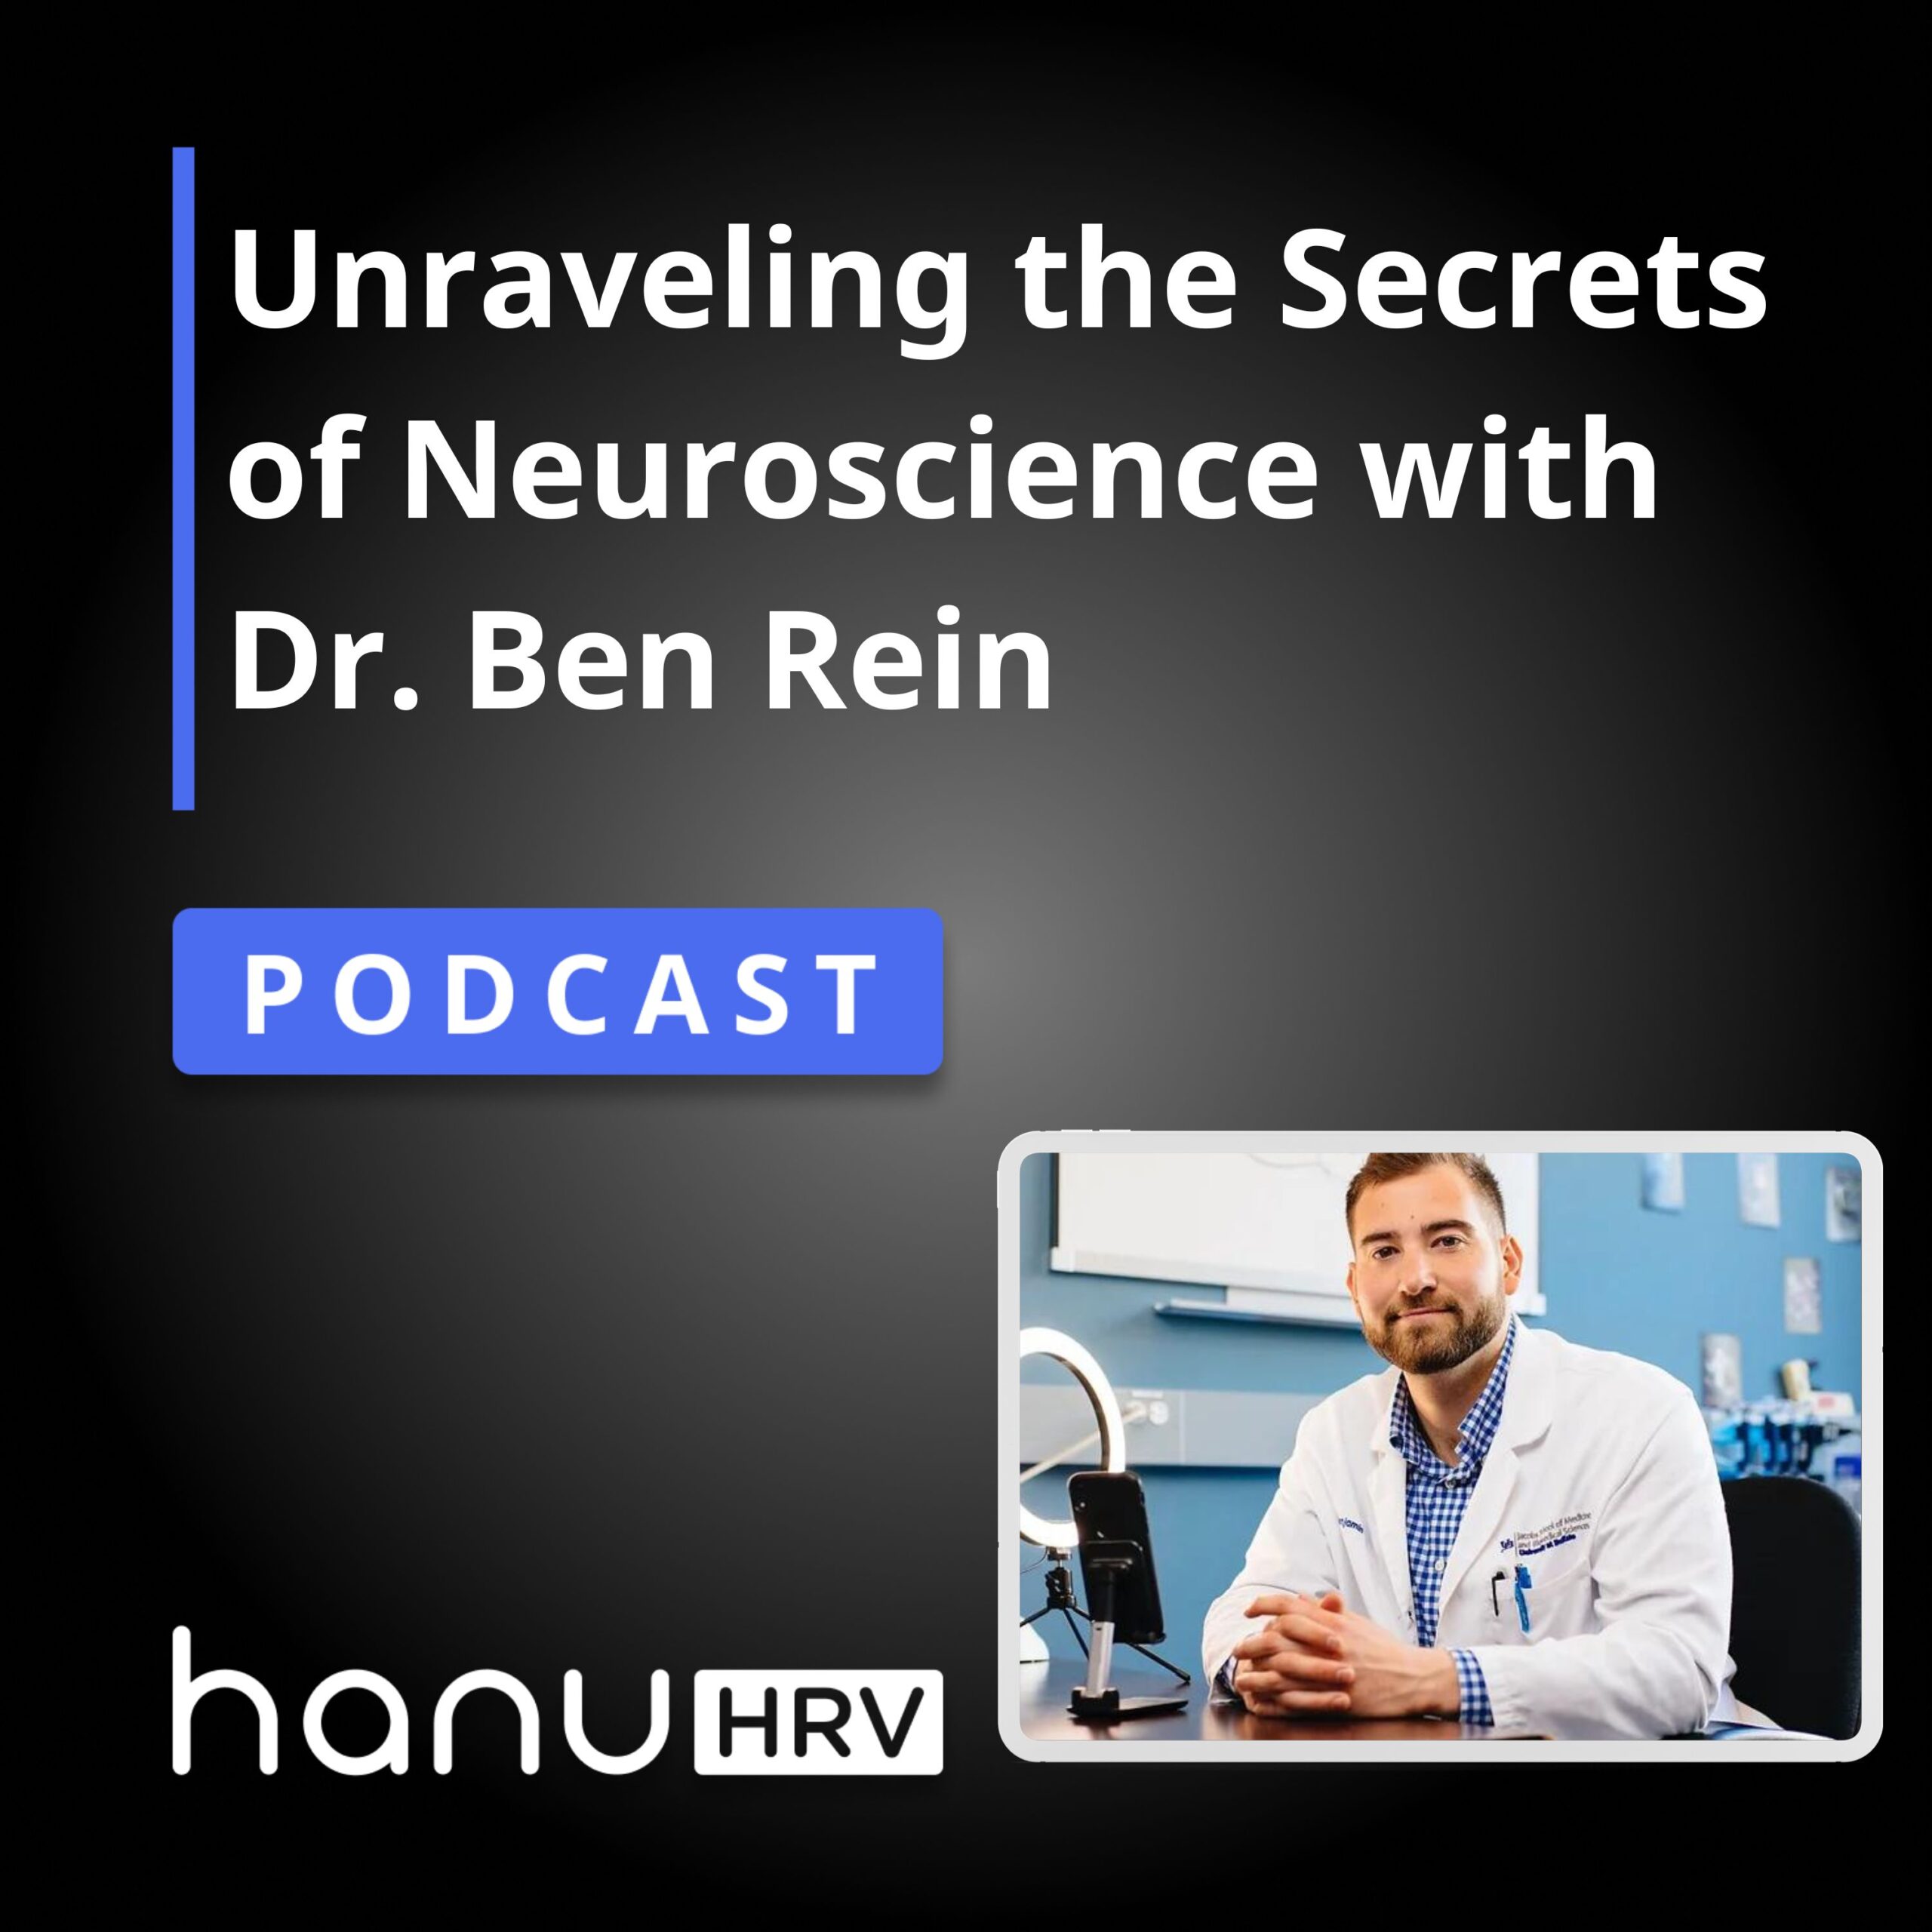 Unraveling the Secrets of Neuroscience with Dr. Ben Rein